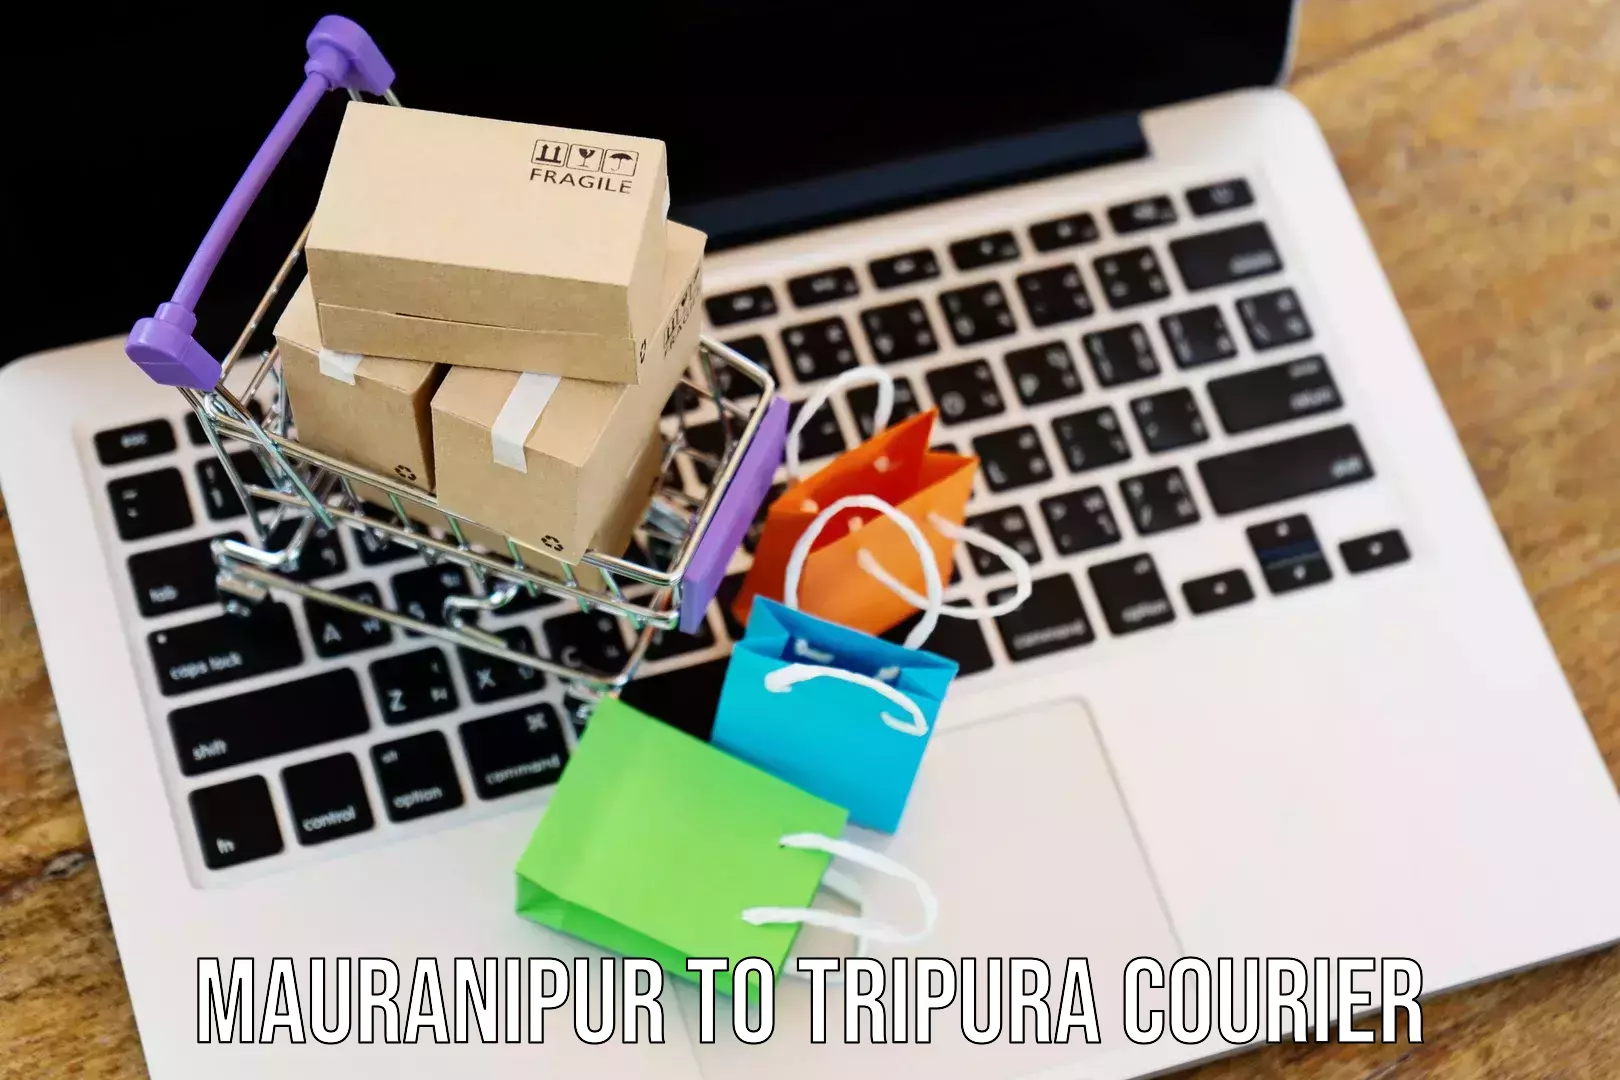 State-of-the-art courier technology Mauranipur to Tripura